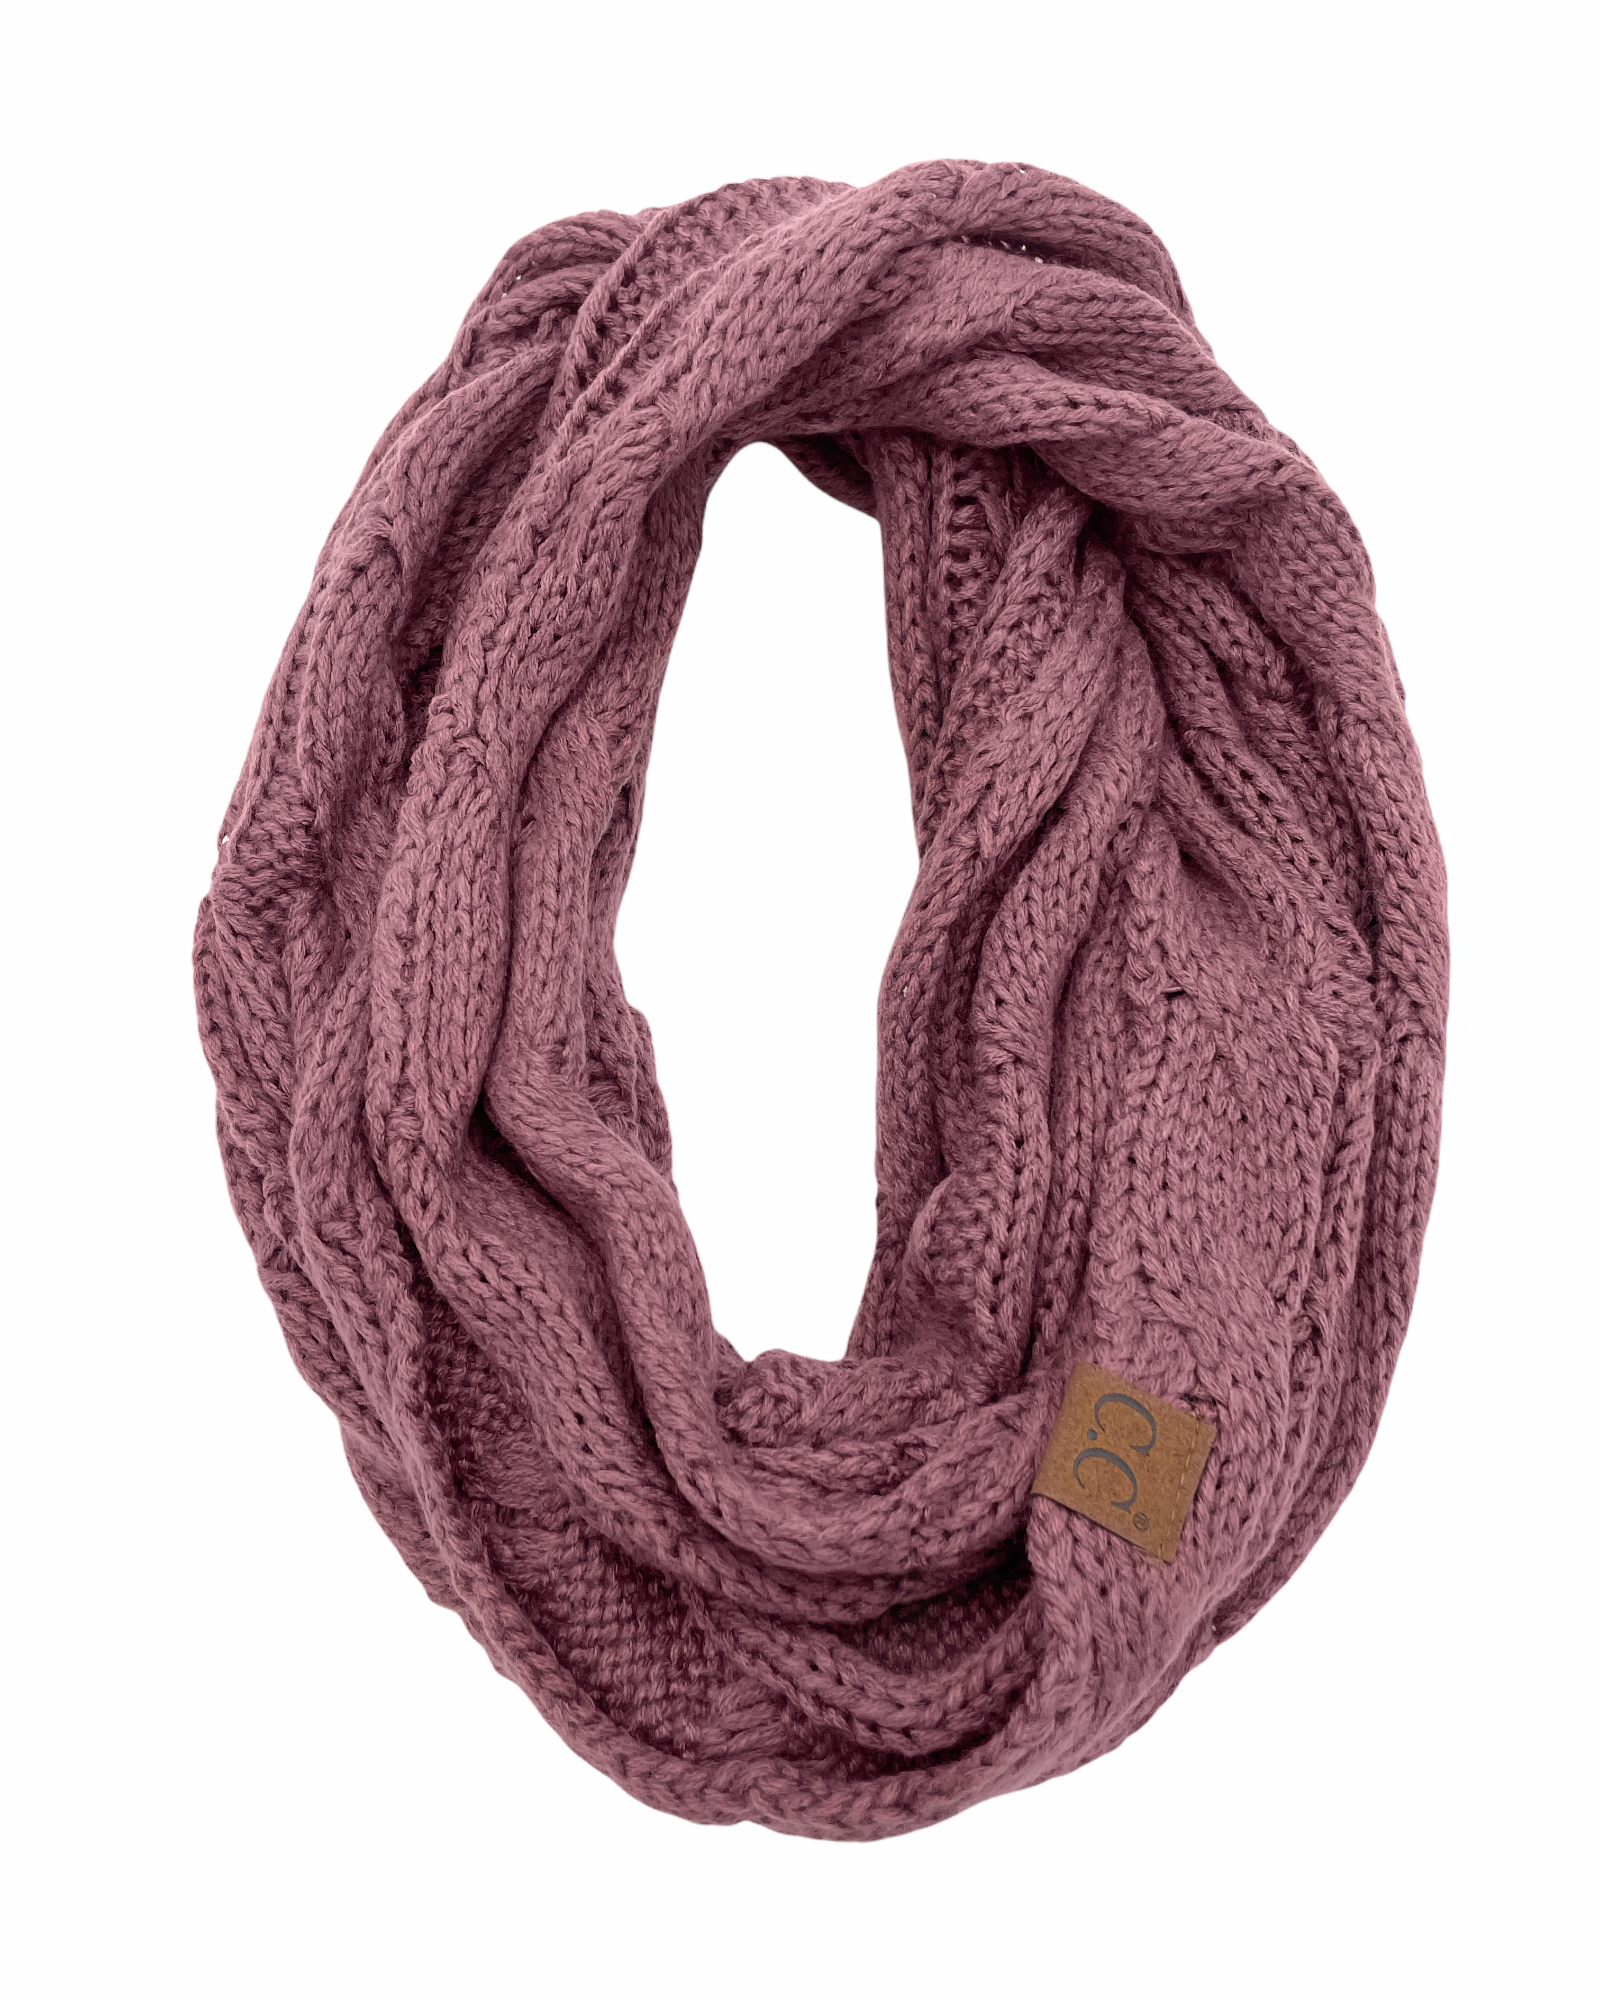 SF-800 Infinity Scarf Coco Berry